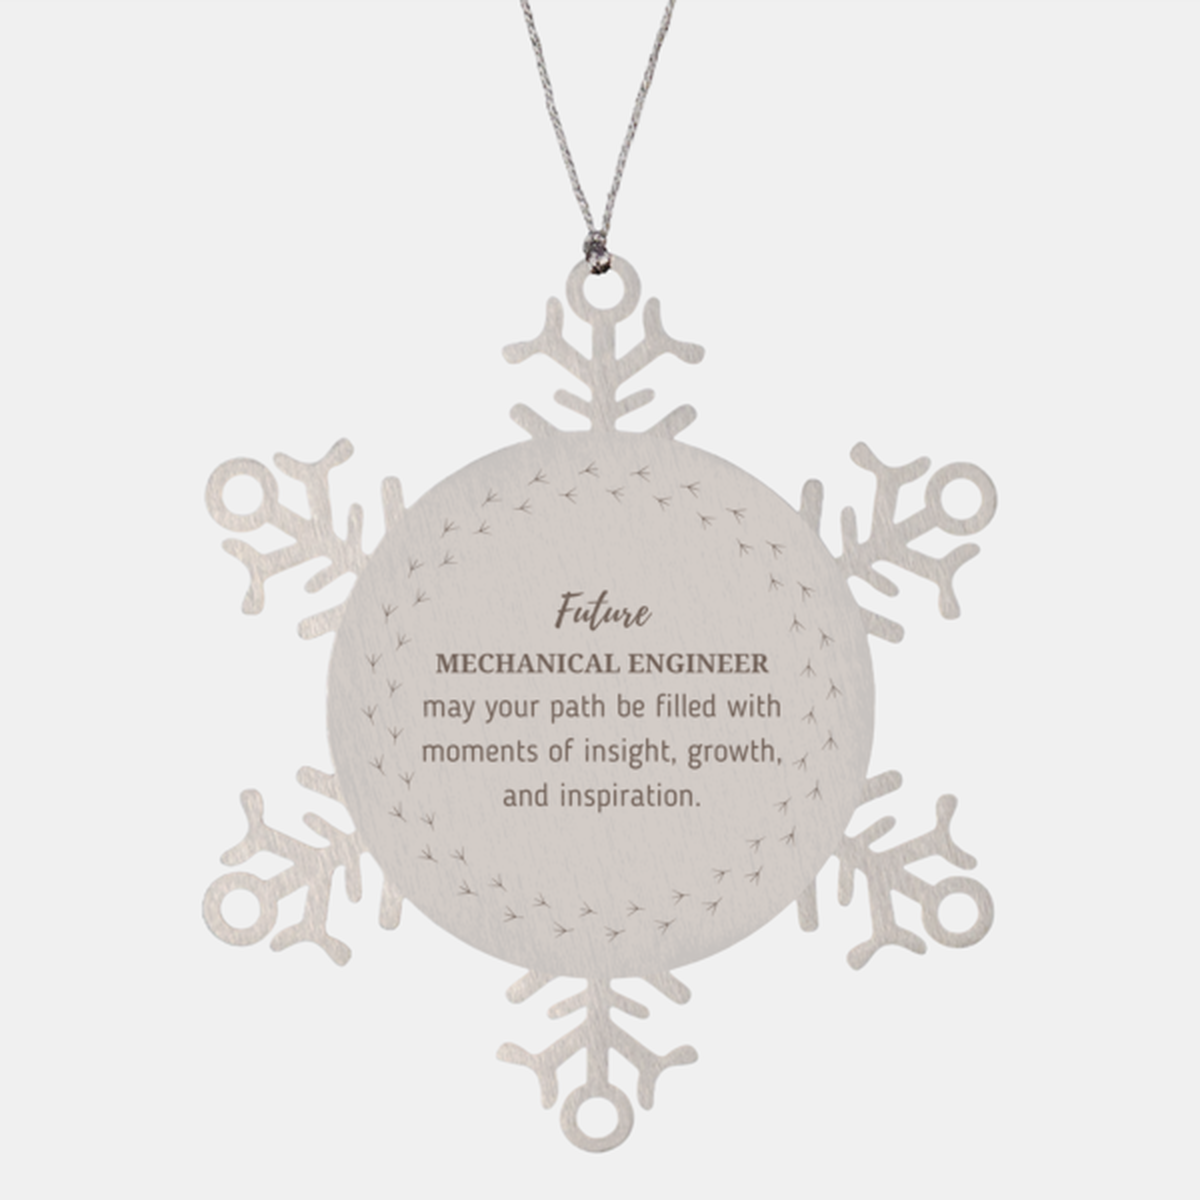 Future Mechanical Engineer Gifts, May your path be filled with moments of insight, Graduation Gifts for New Mechanical Engineer, Christmas Unique Snowflake Ornament For Men, Women, Friends